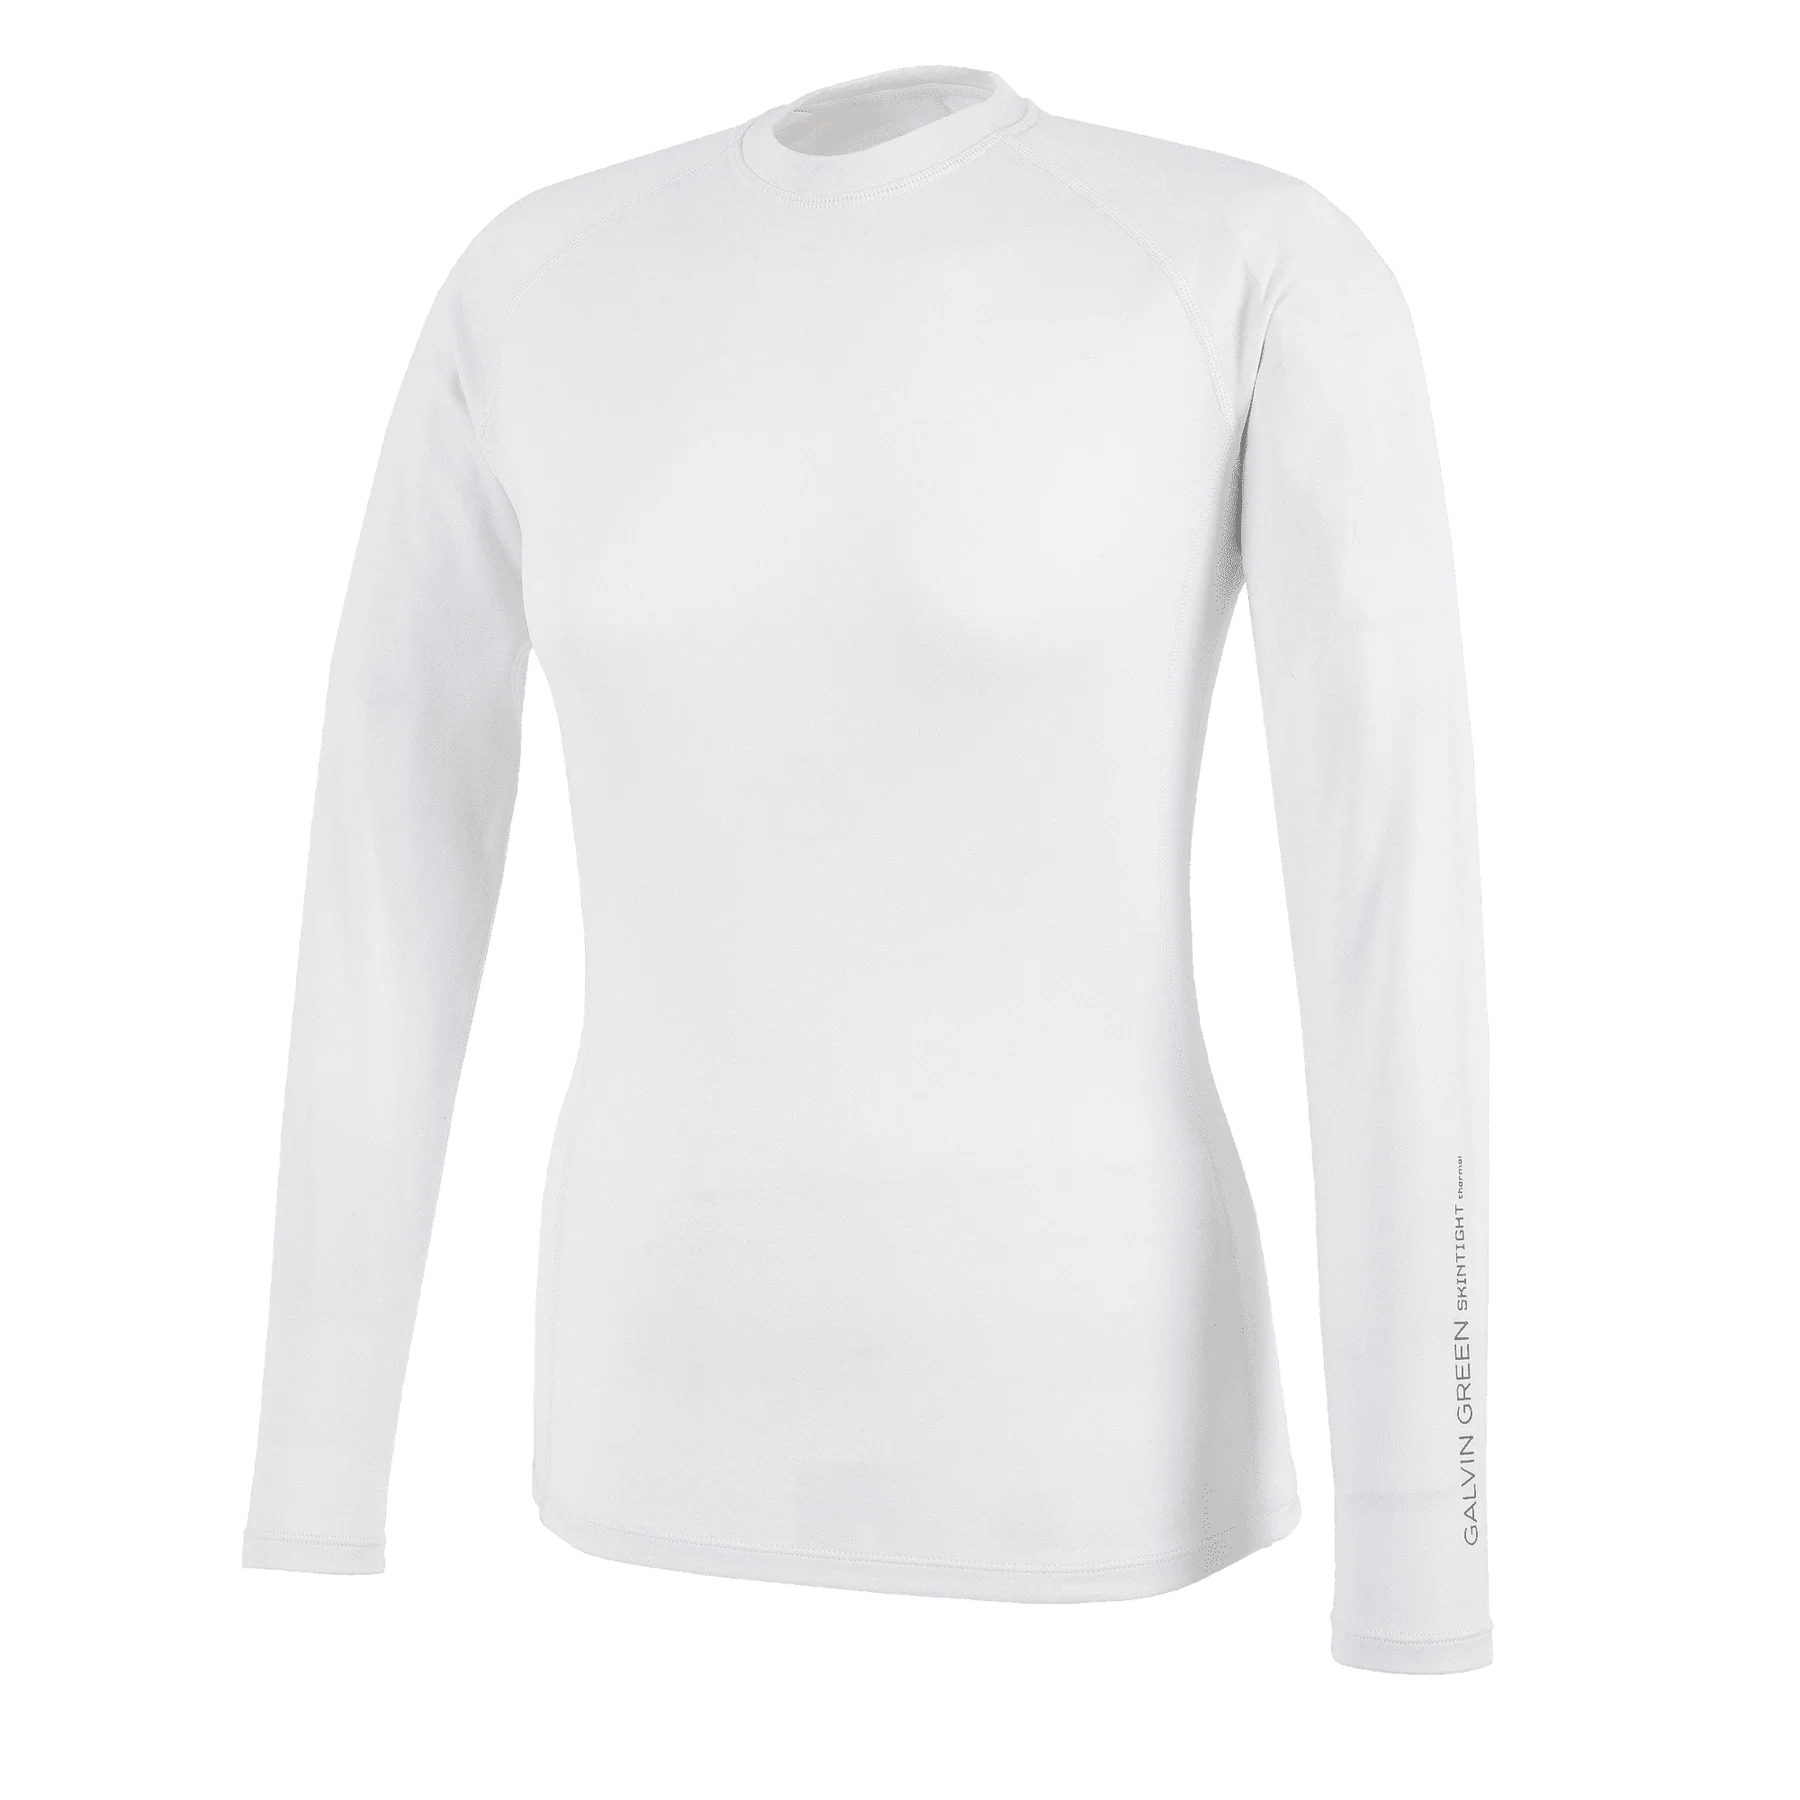 GALVIN GREEN WOMEN'S ELAINE THERMAL BASE LAYER TOP WHITE